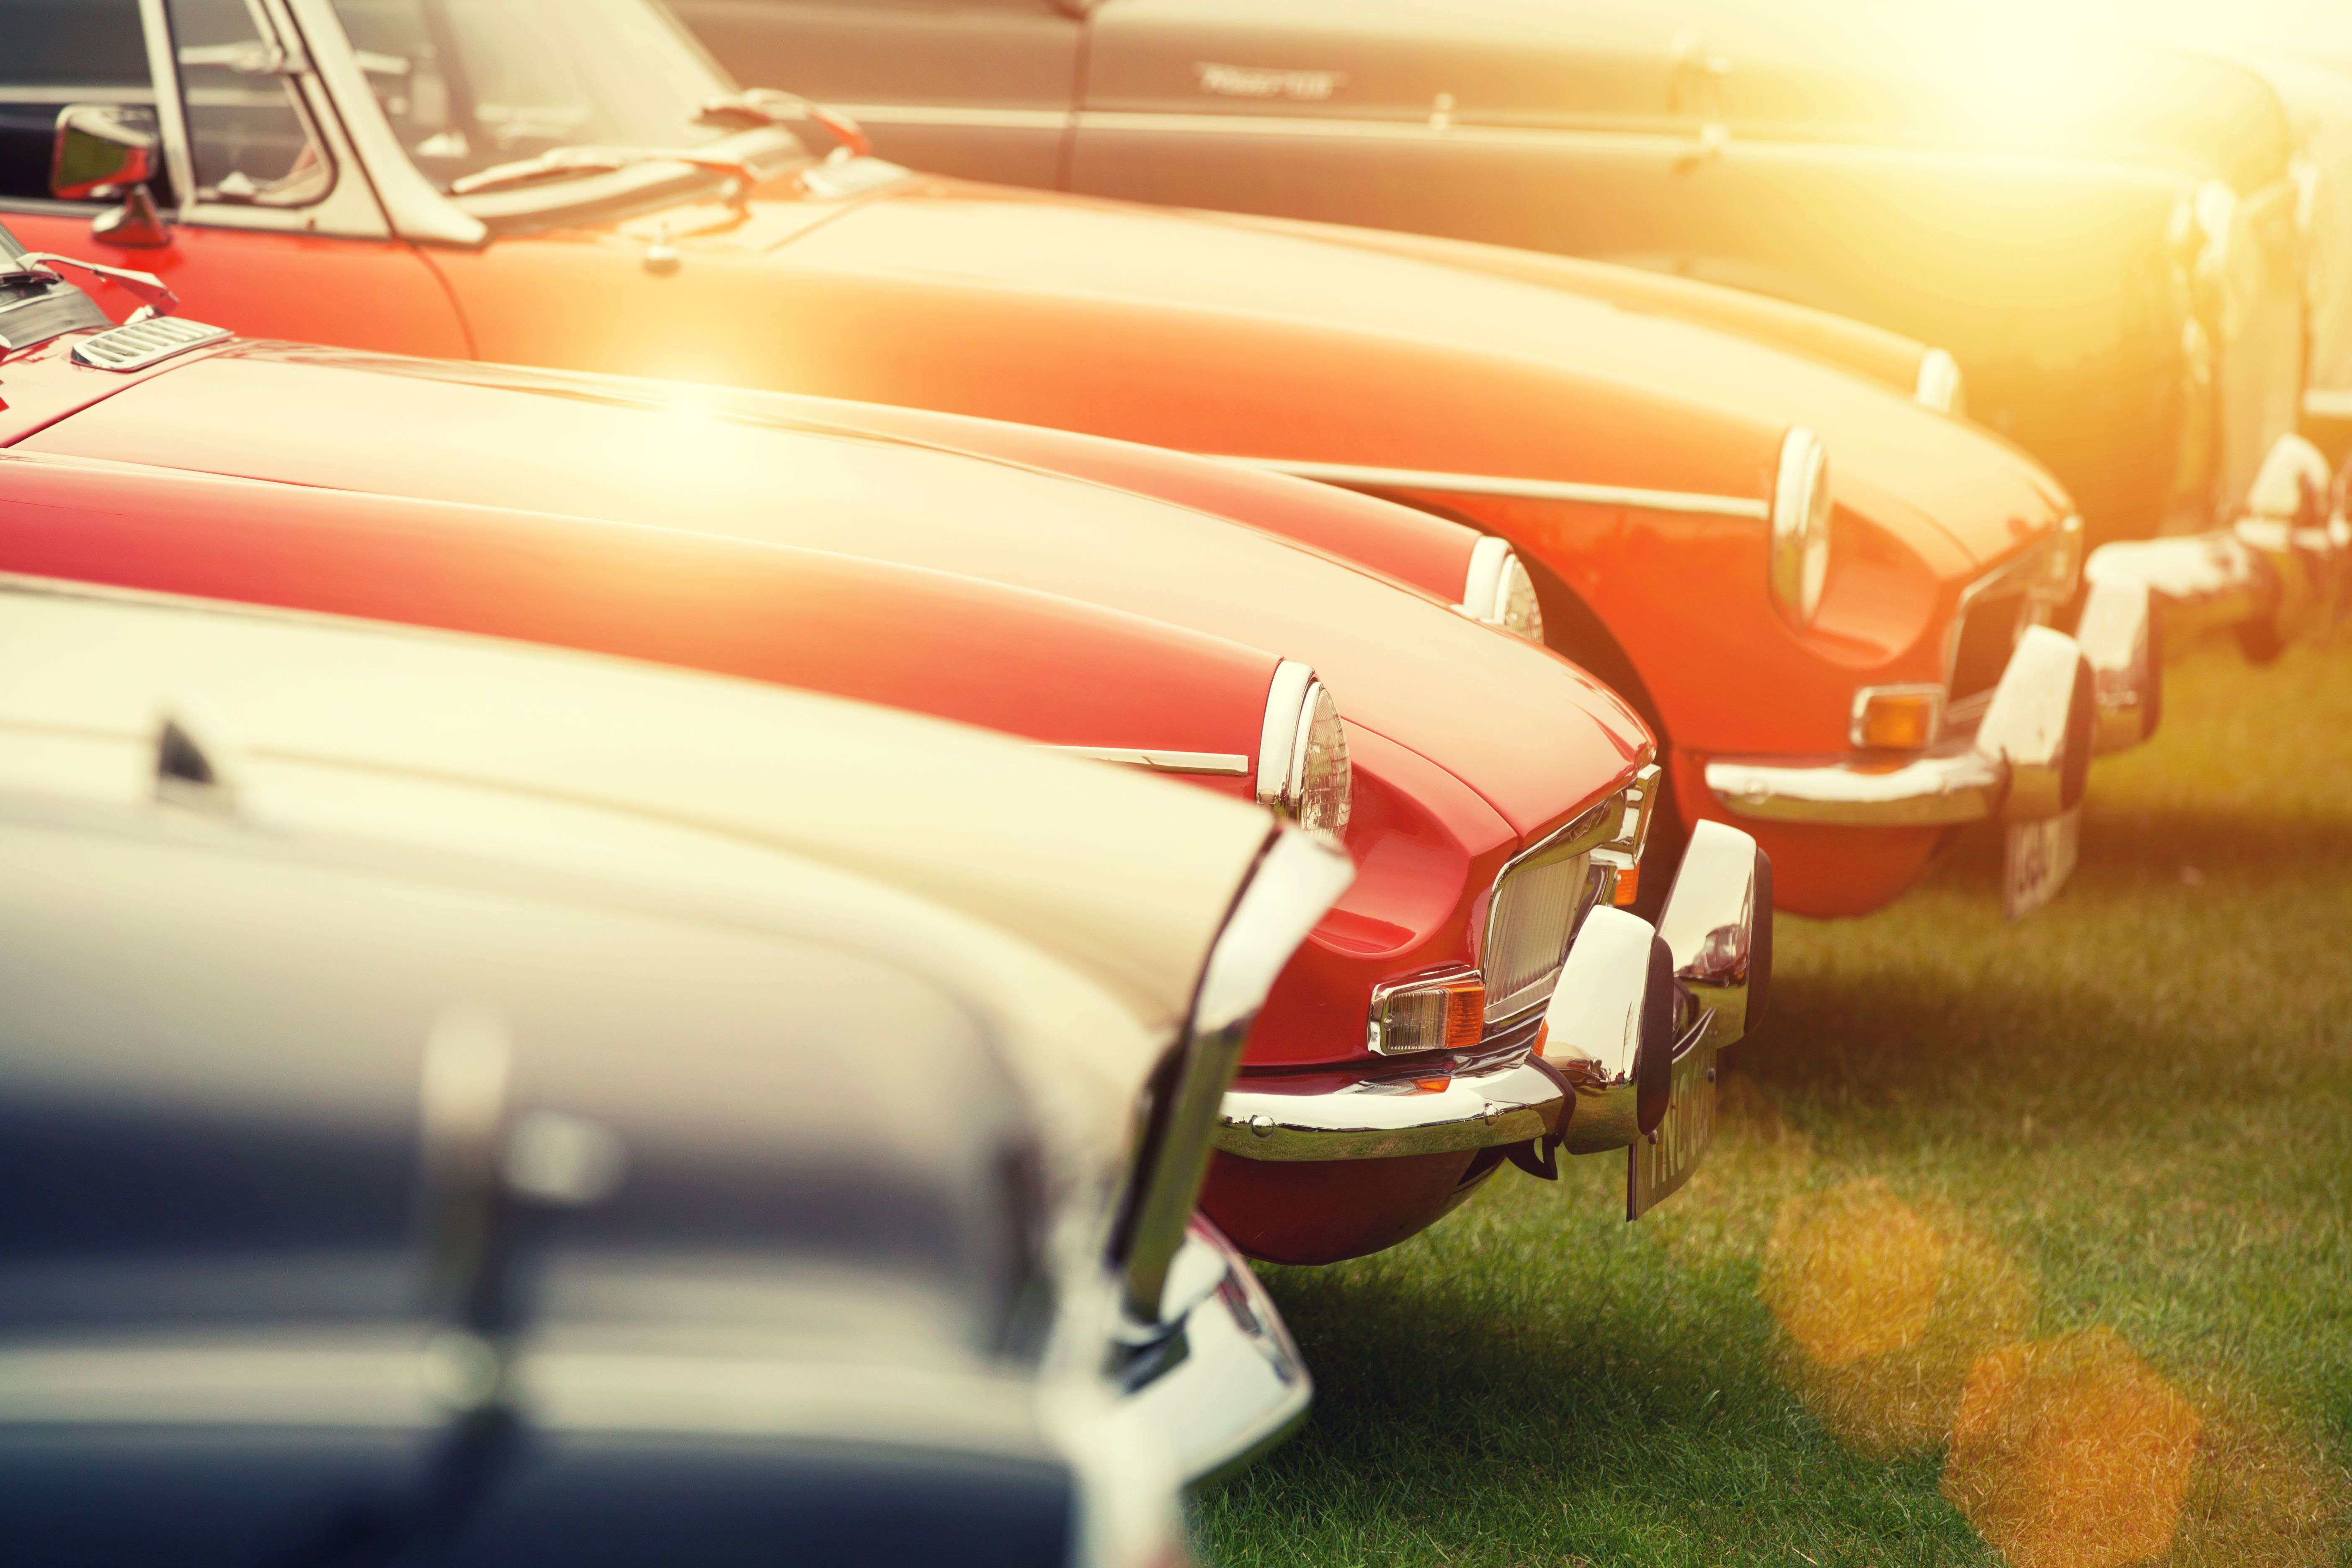 Owners of vintage cars spend time and money nurturing the source of their passion.